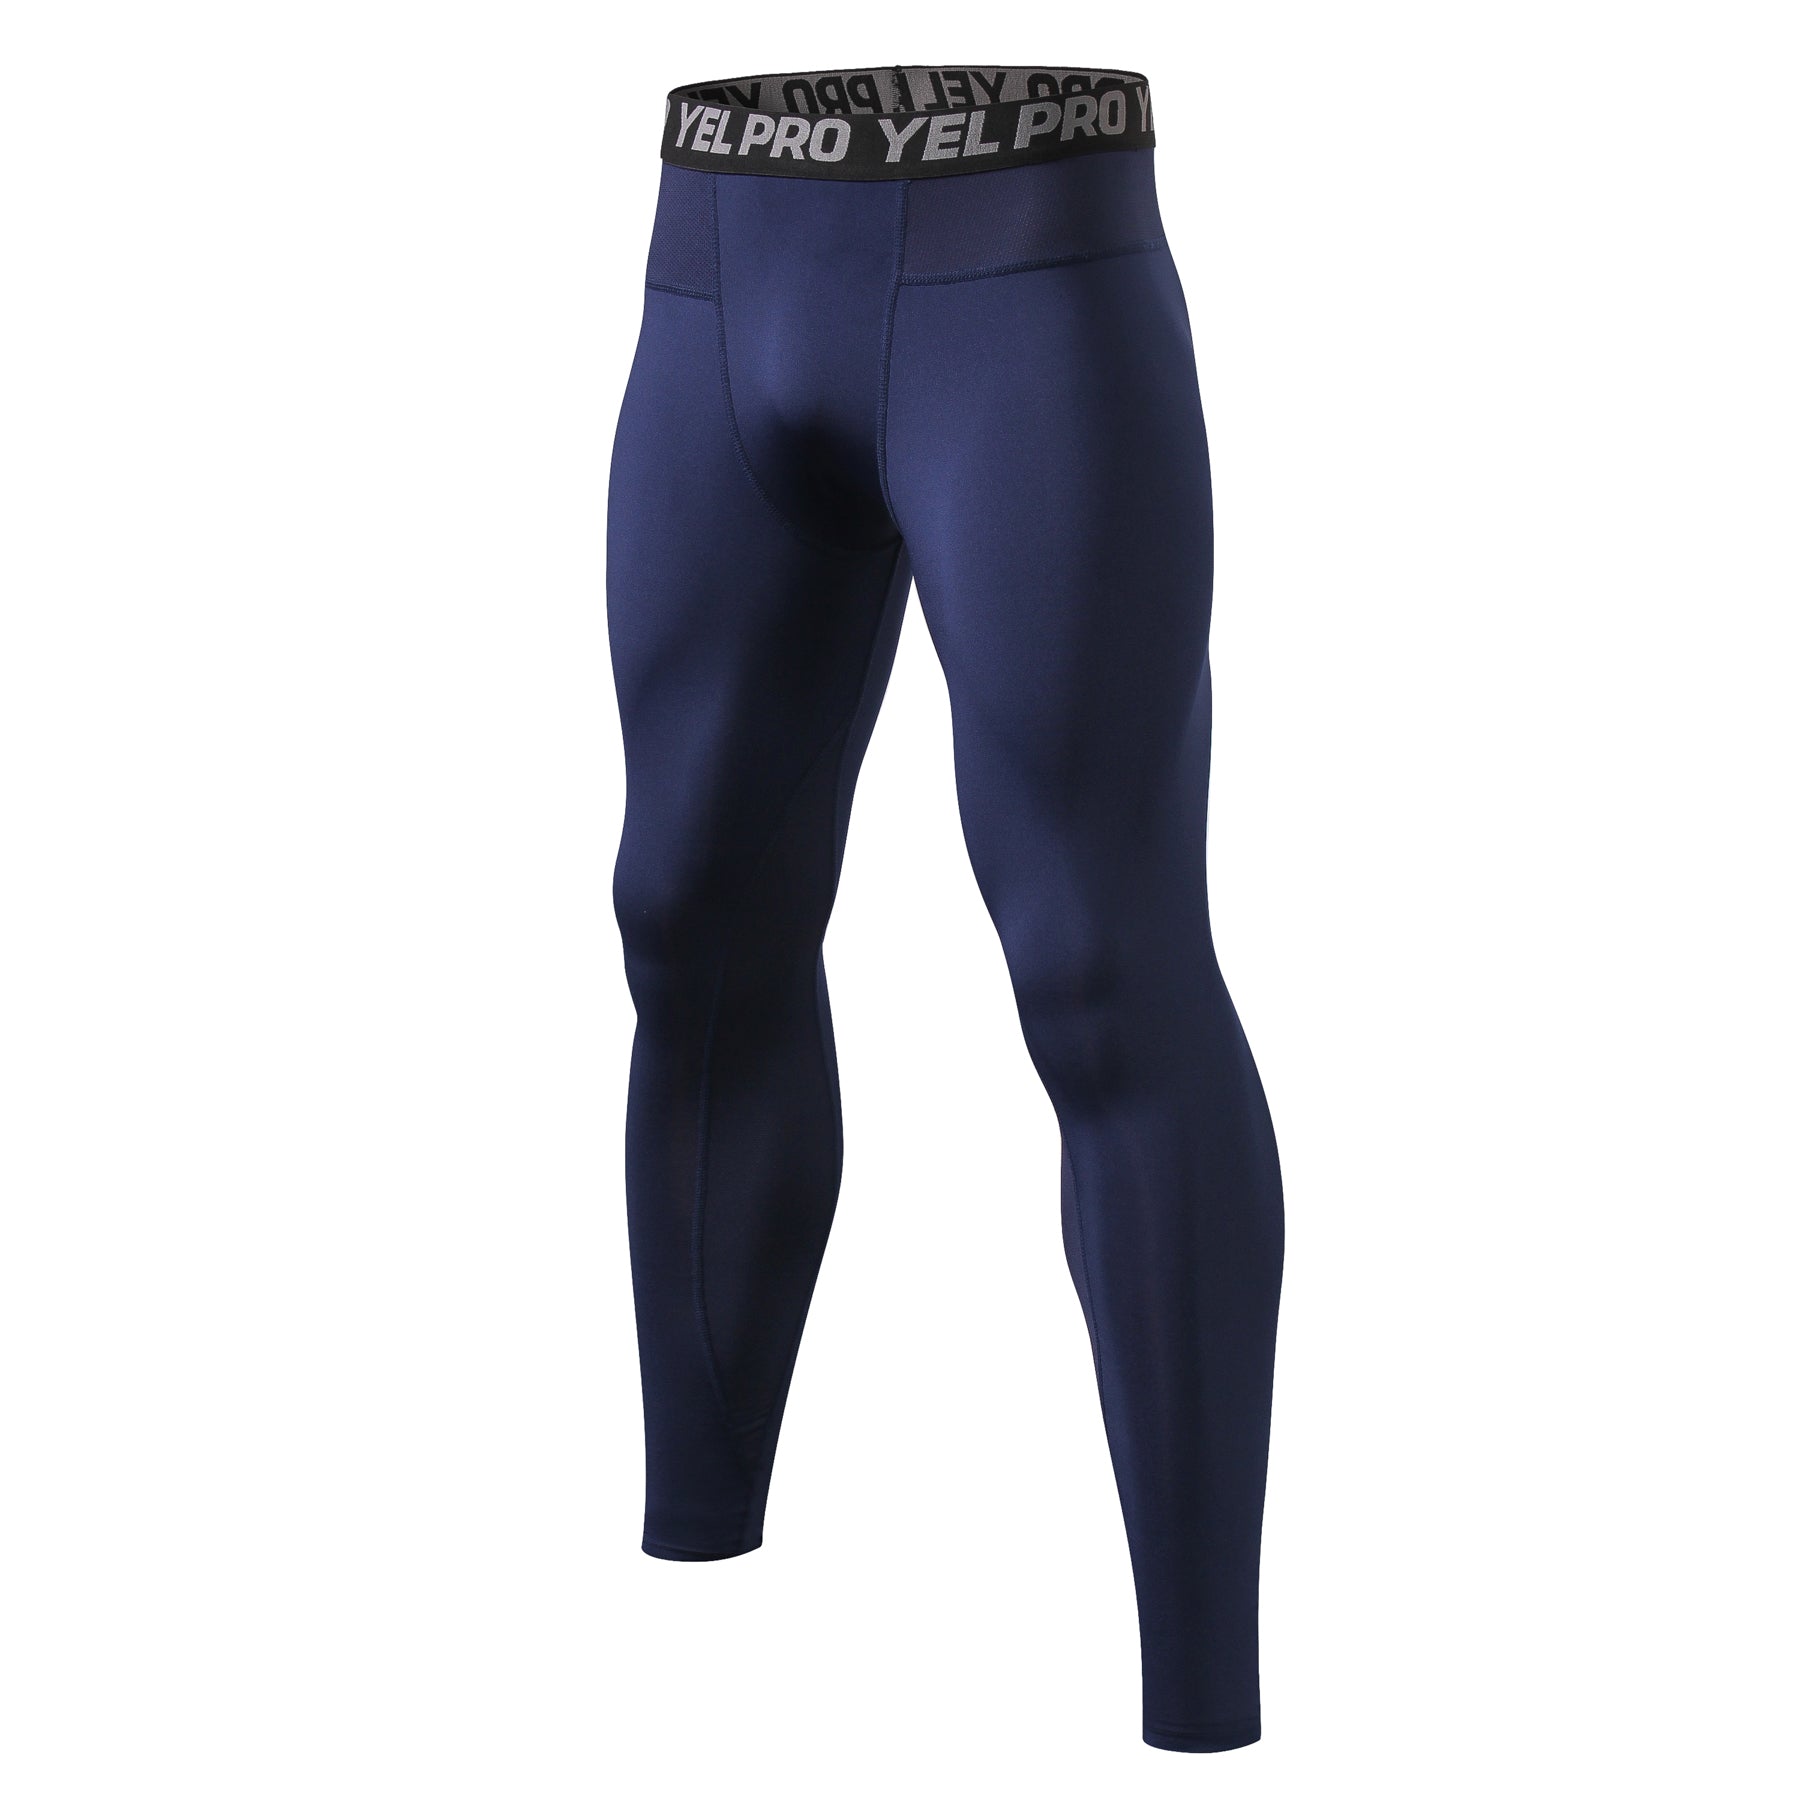 Men's Compression Pants Running Tights Workout Leggings Sports Gym Athletic  Tights